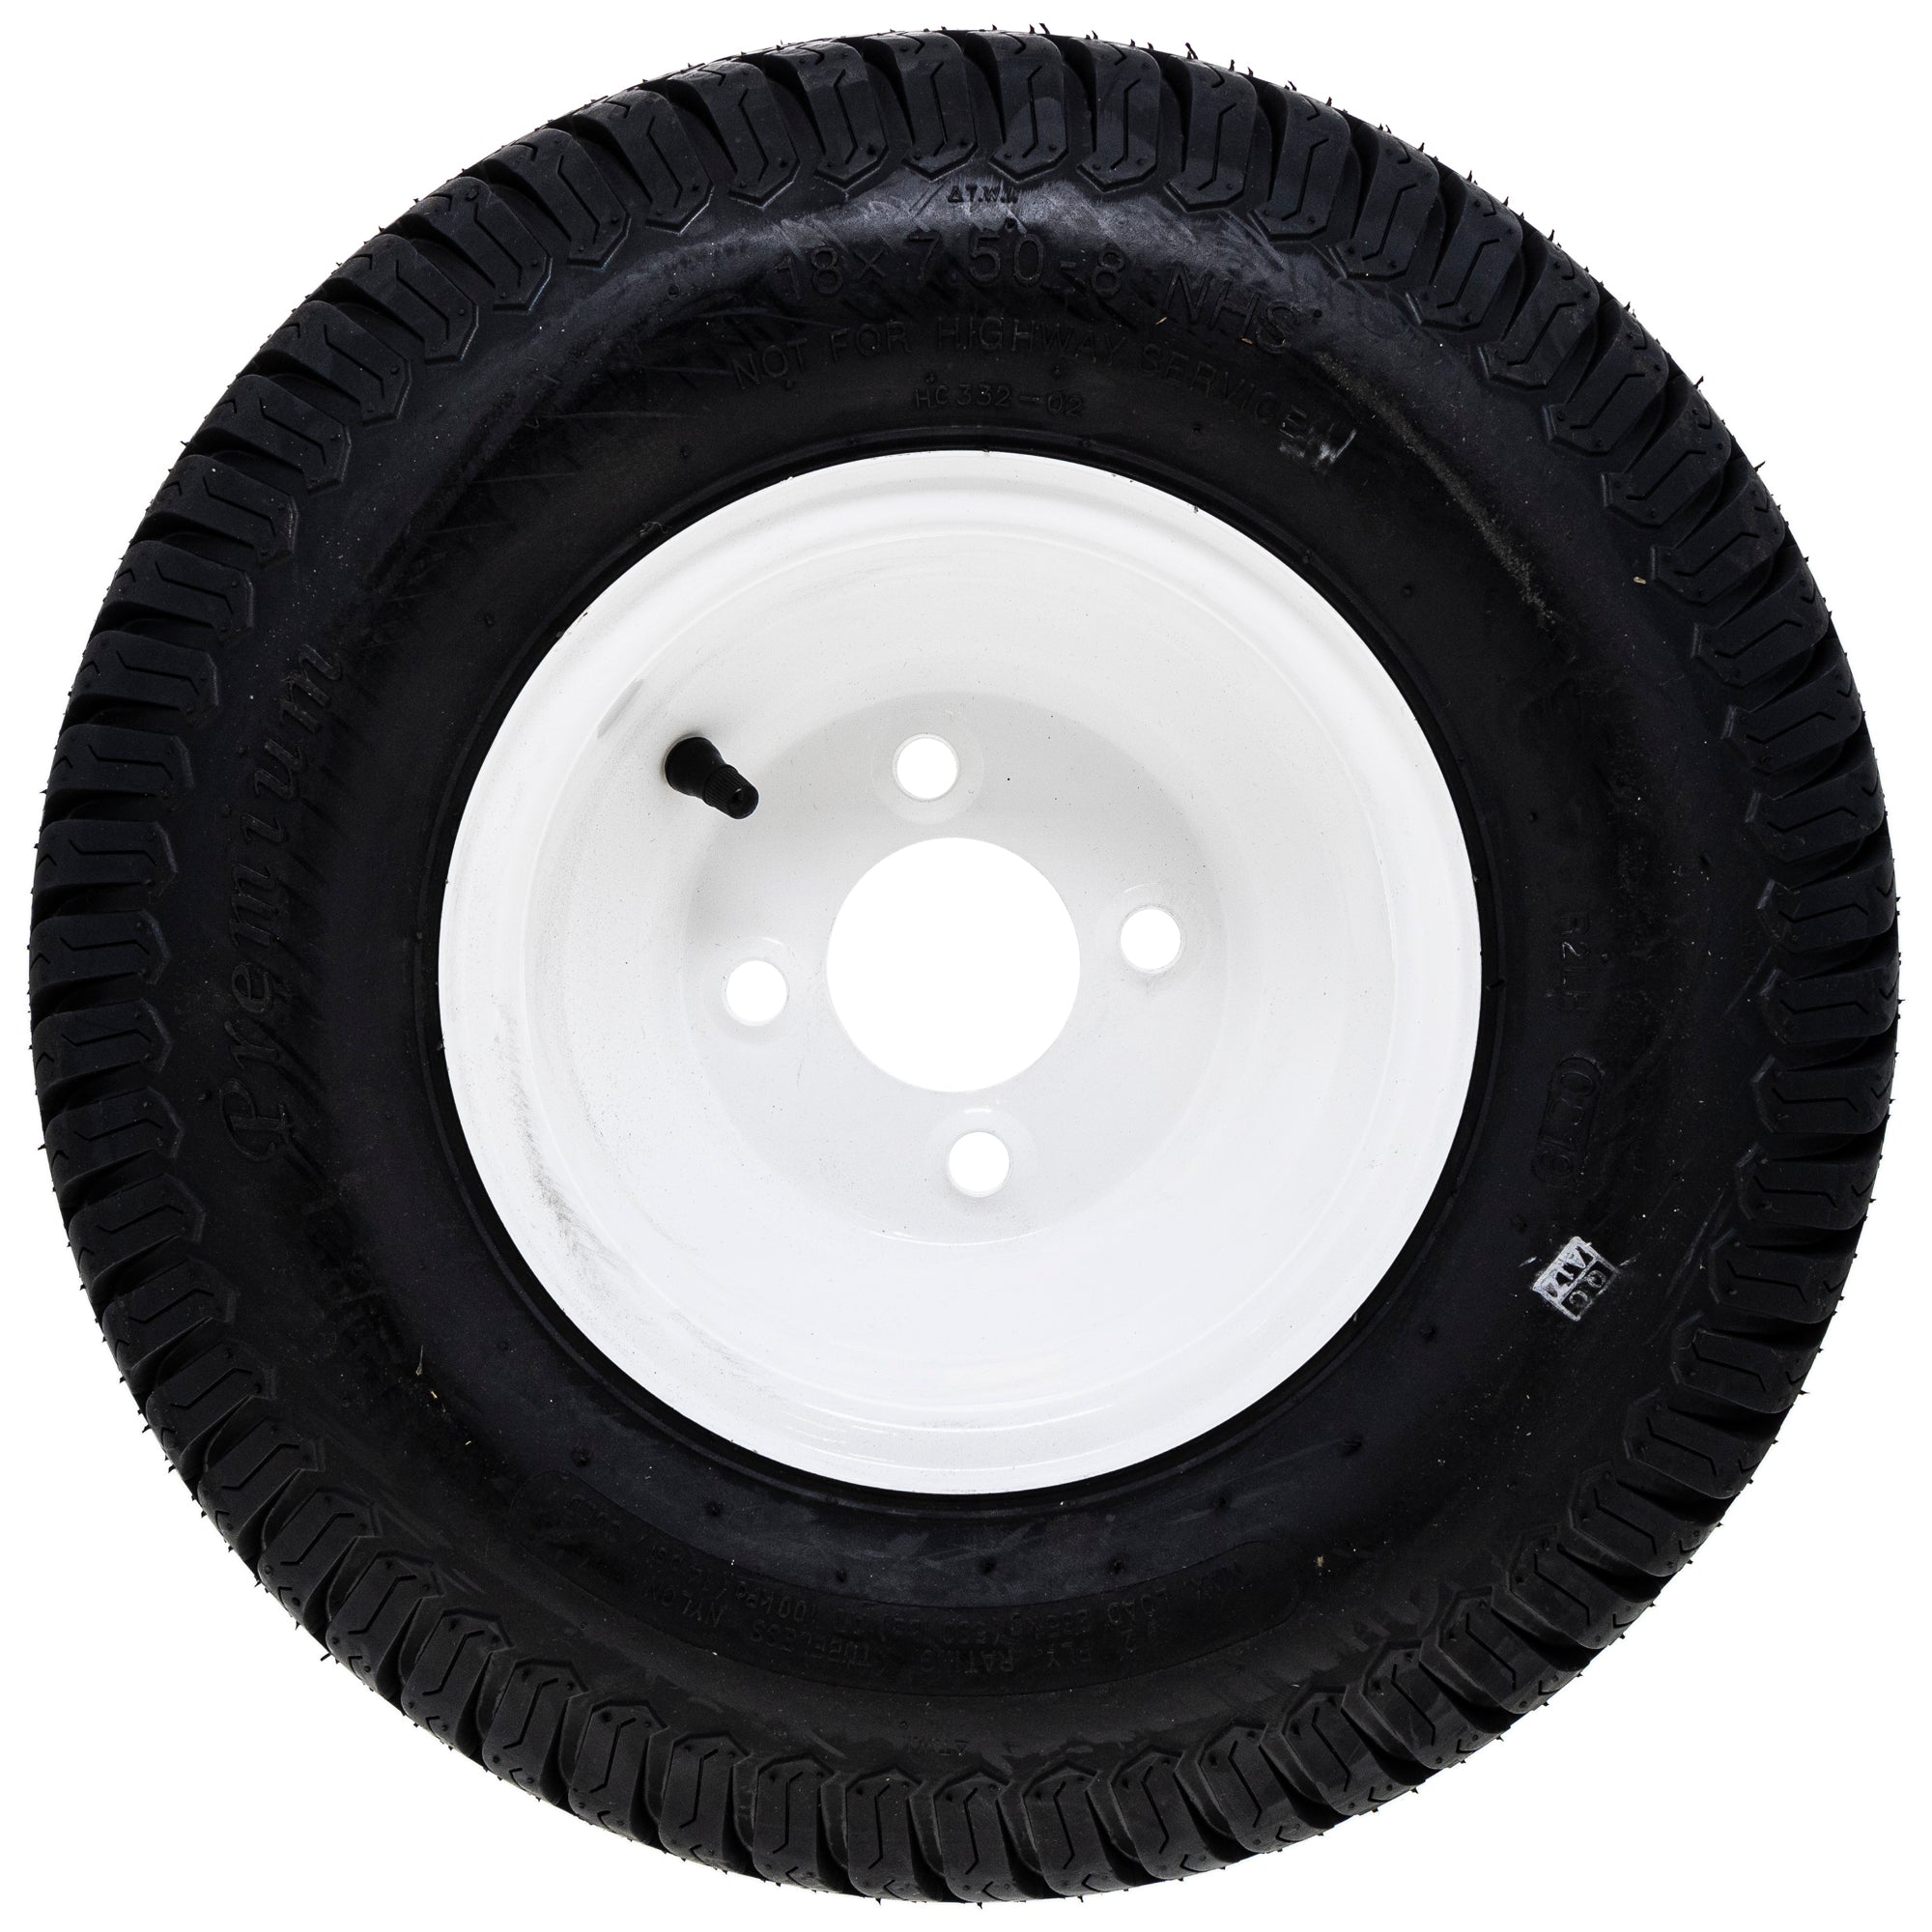 Exmark 131-3671 2 Tire and Wheel Set | Mow The Lawn